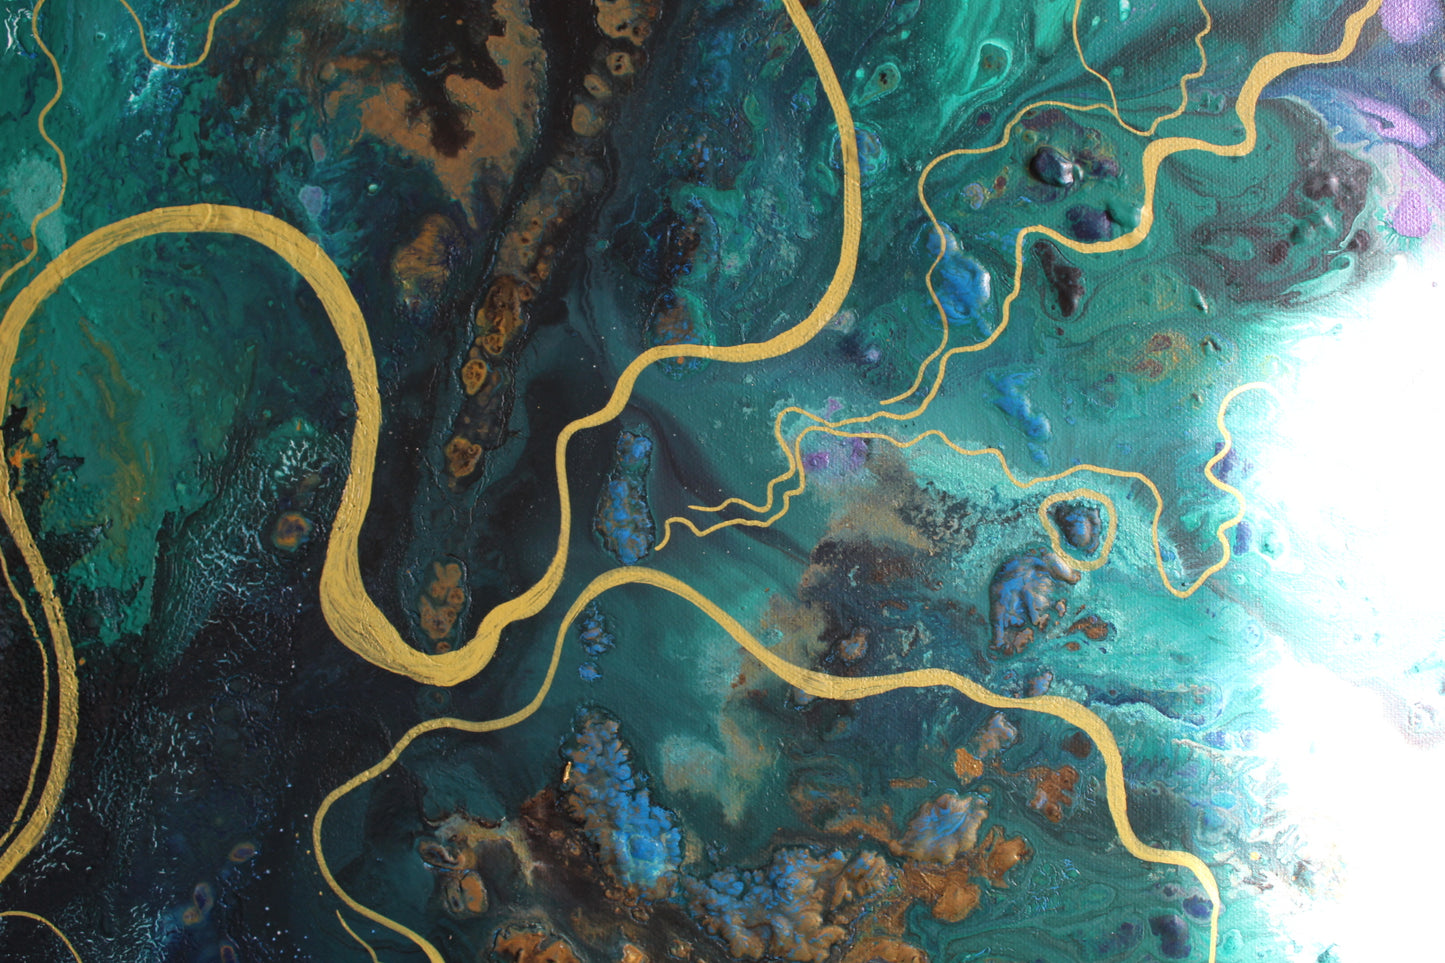 'All I have is a river' Original painting on canvas, 92x61cm